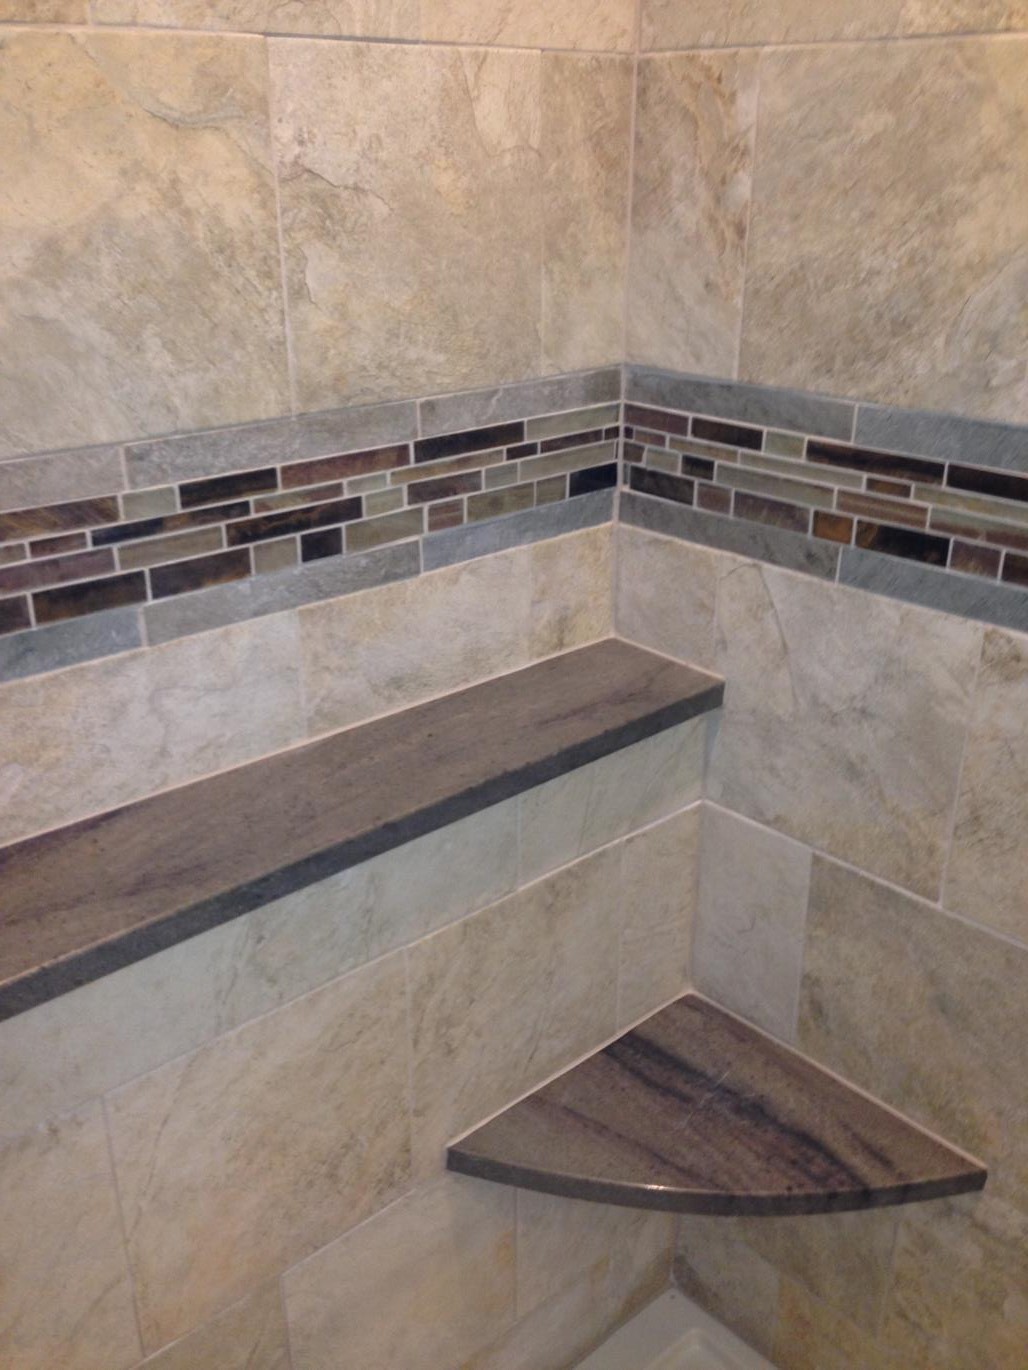 Best Tile To Use In A Bathroom Remodel, Which Tile Is Best For Bathroom